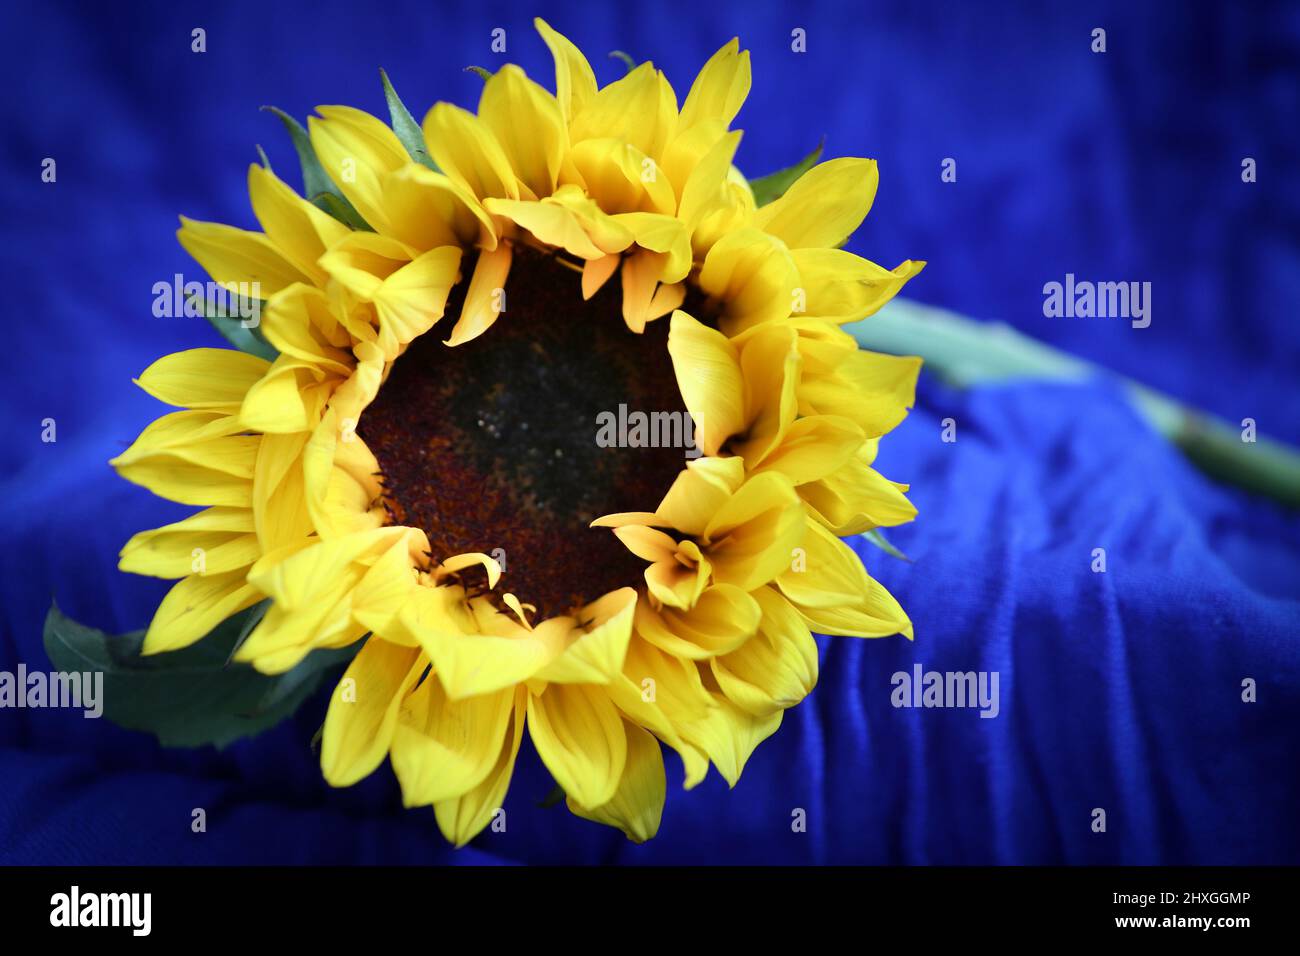 A still life sunflower against a blue background. Stock Photo